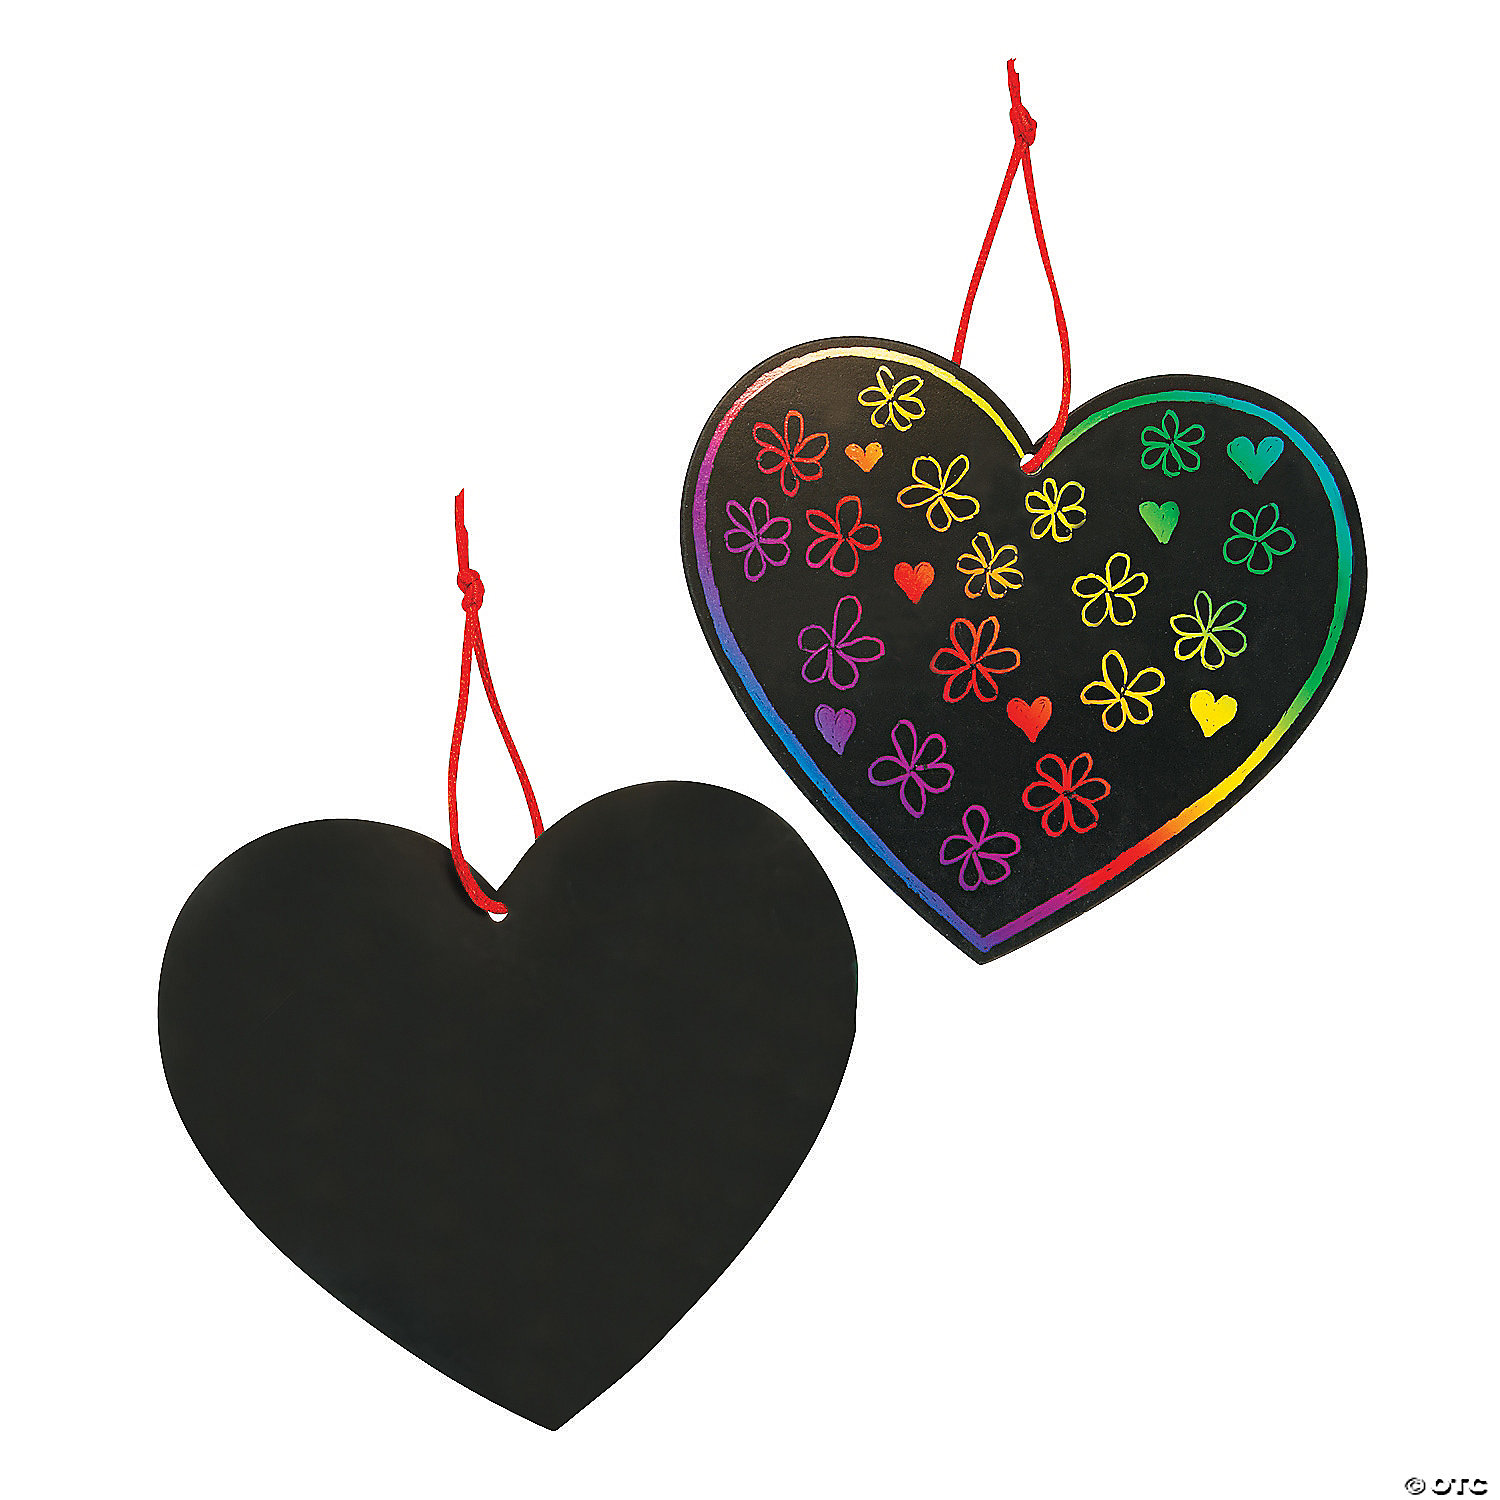 Valentines Exchange Cards Black Scratch Paper CCFUN Valentine's Day Scratch Paper Ornaments Kit 12pcs Magic Colorful Scratch Magic Color Scratch Hearts for Valentine's Day DIY Gift Tags 